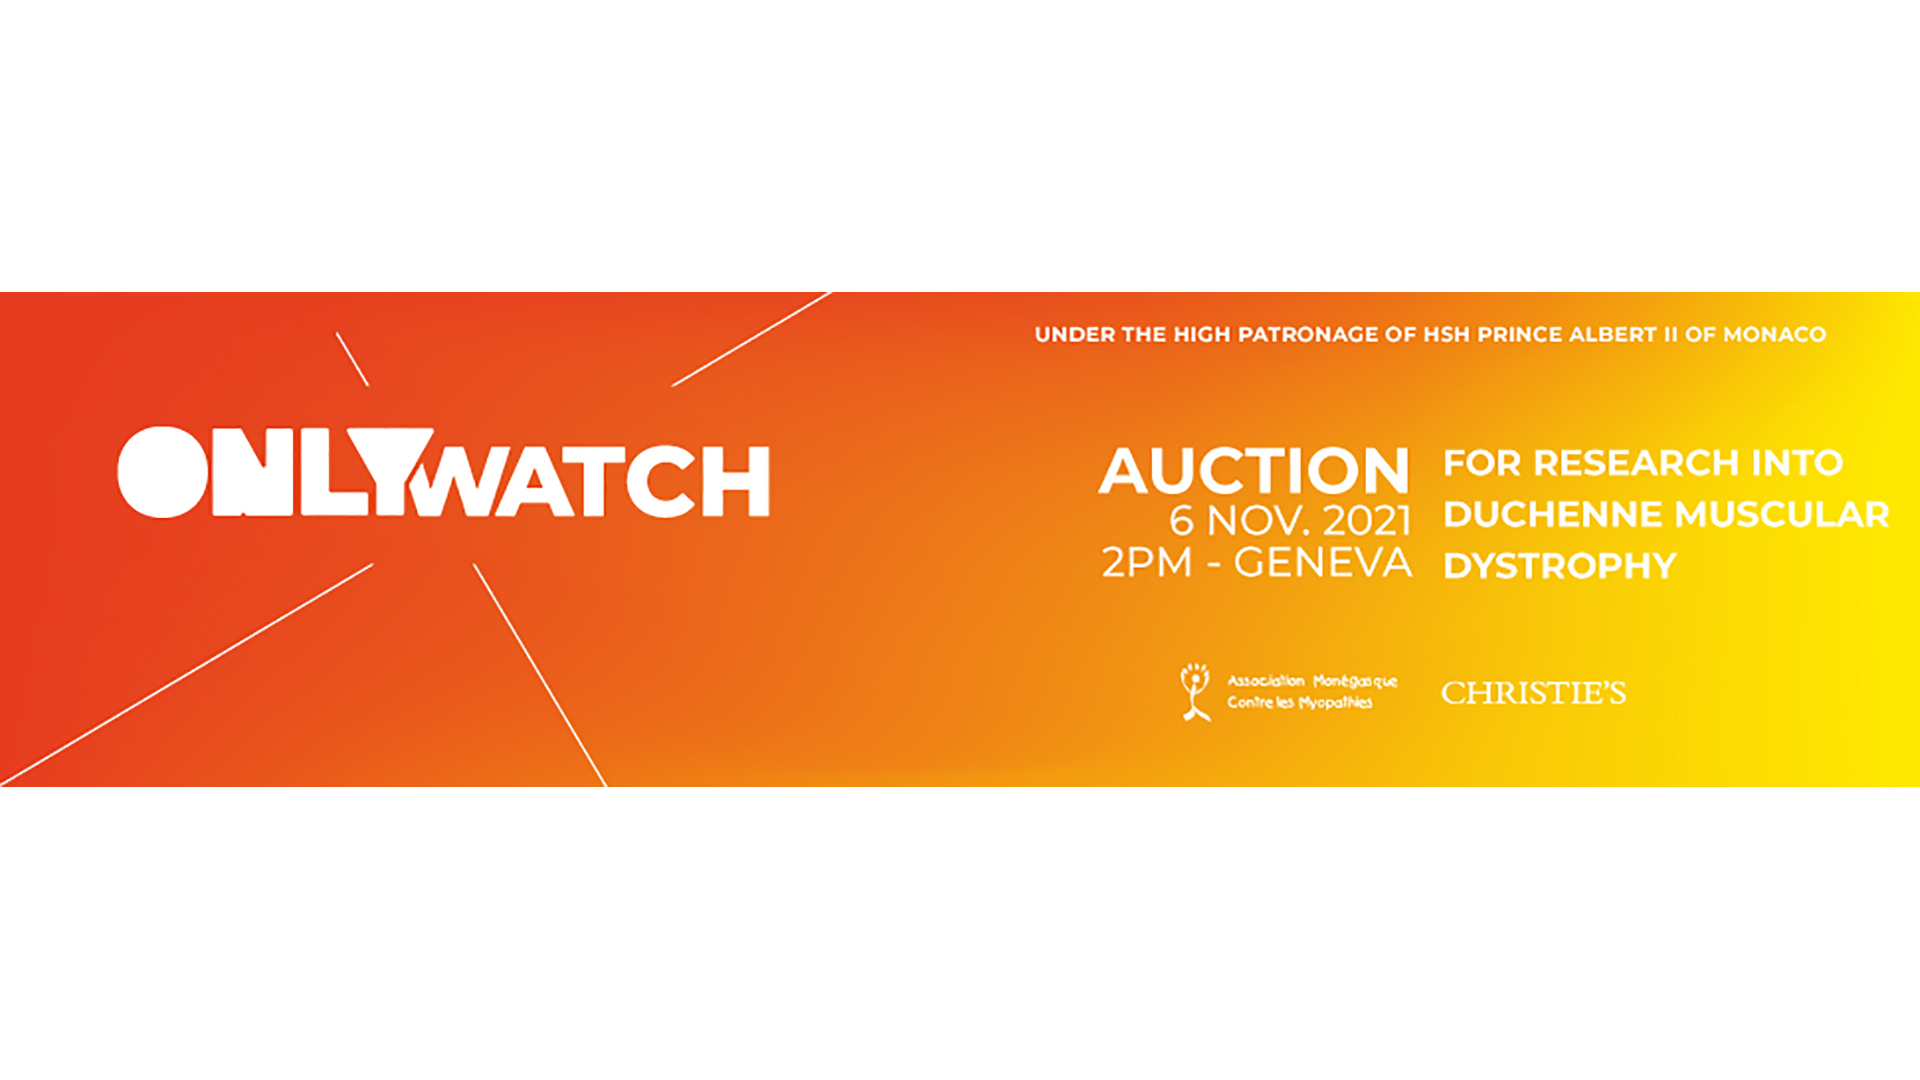 Only Watch Announces 54 Participating Brands For Geneva Charity Auction On November 6th, 2021